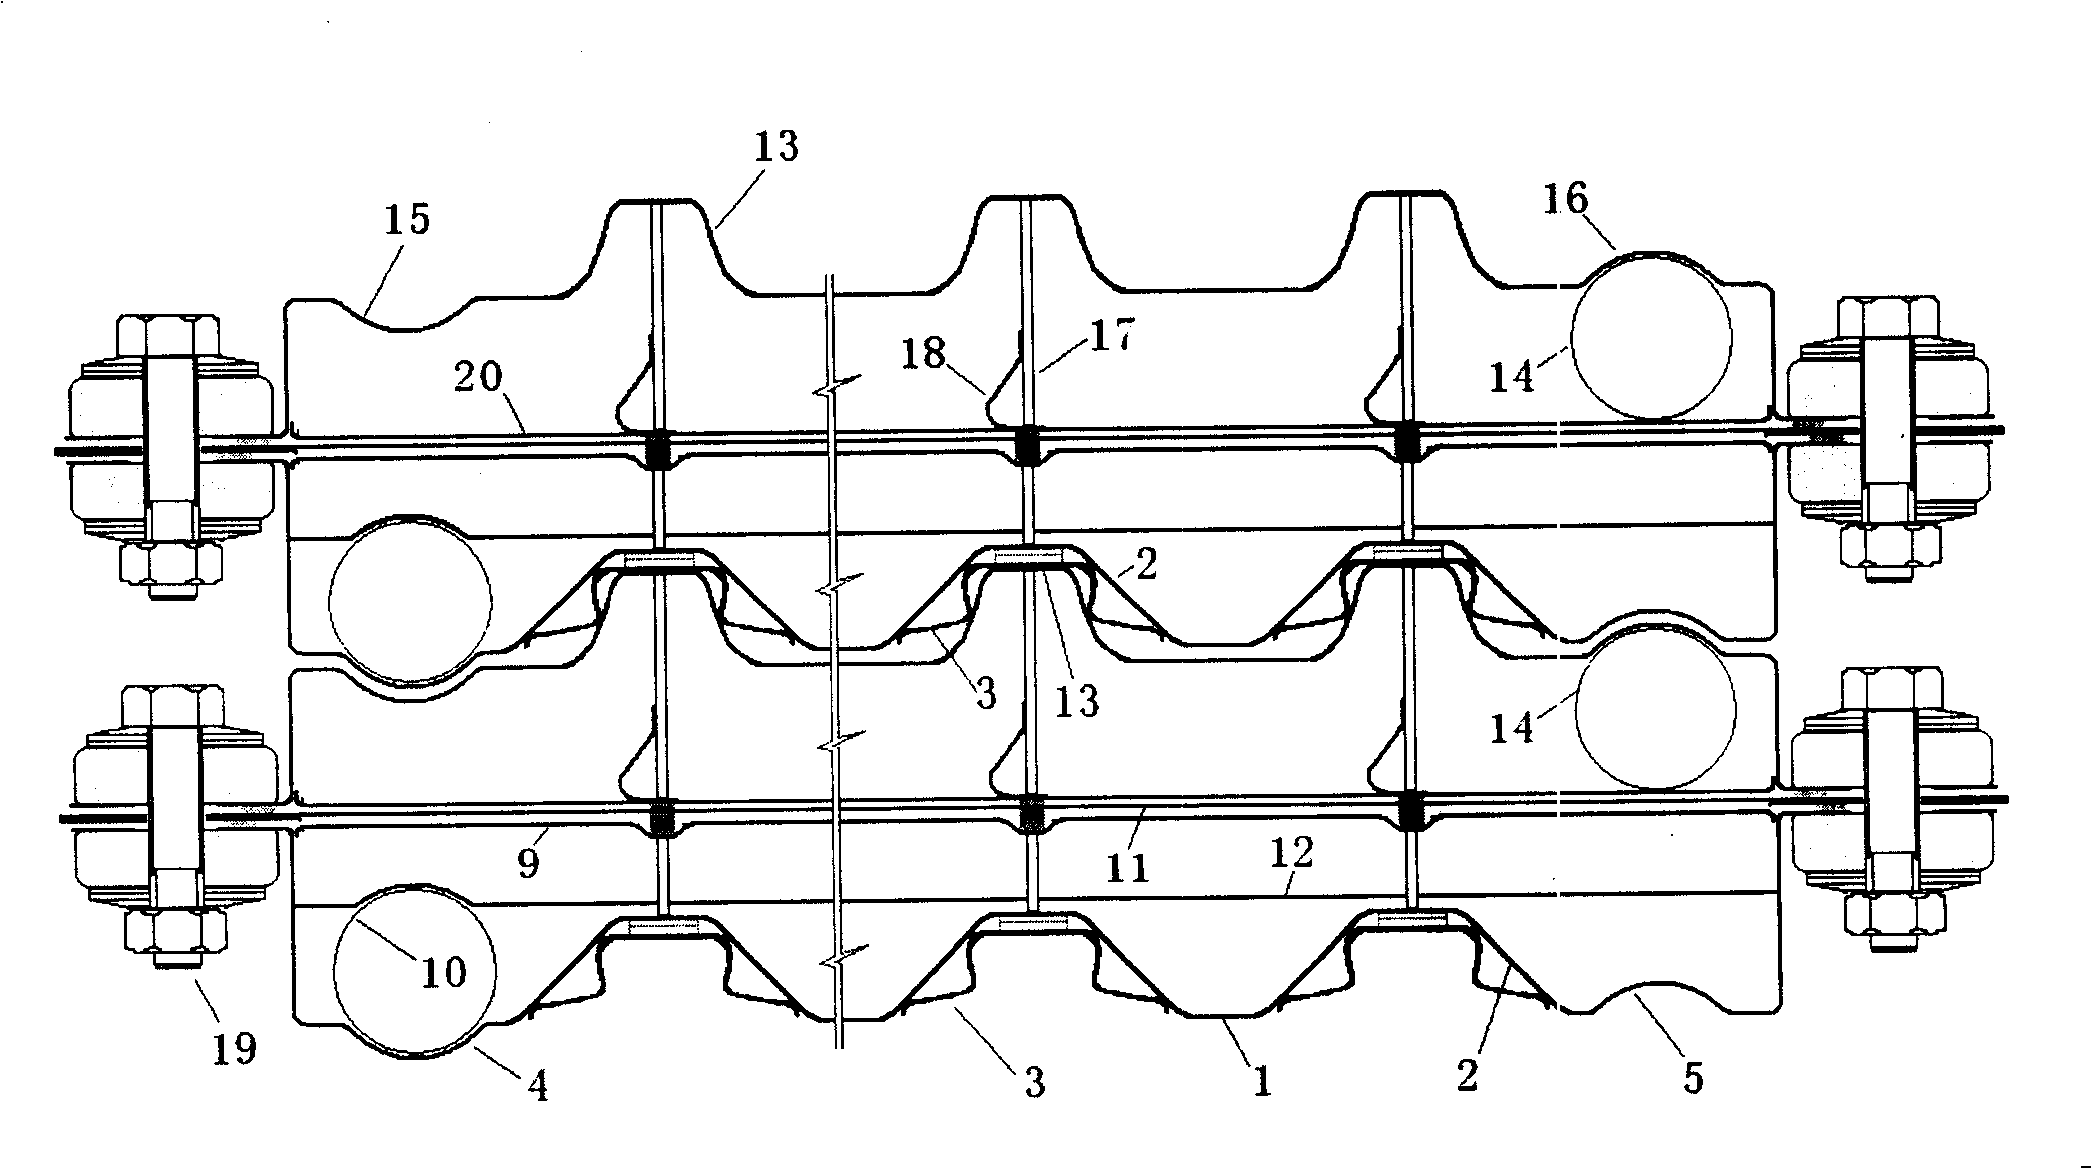 Electrode structure for electrochemical device